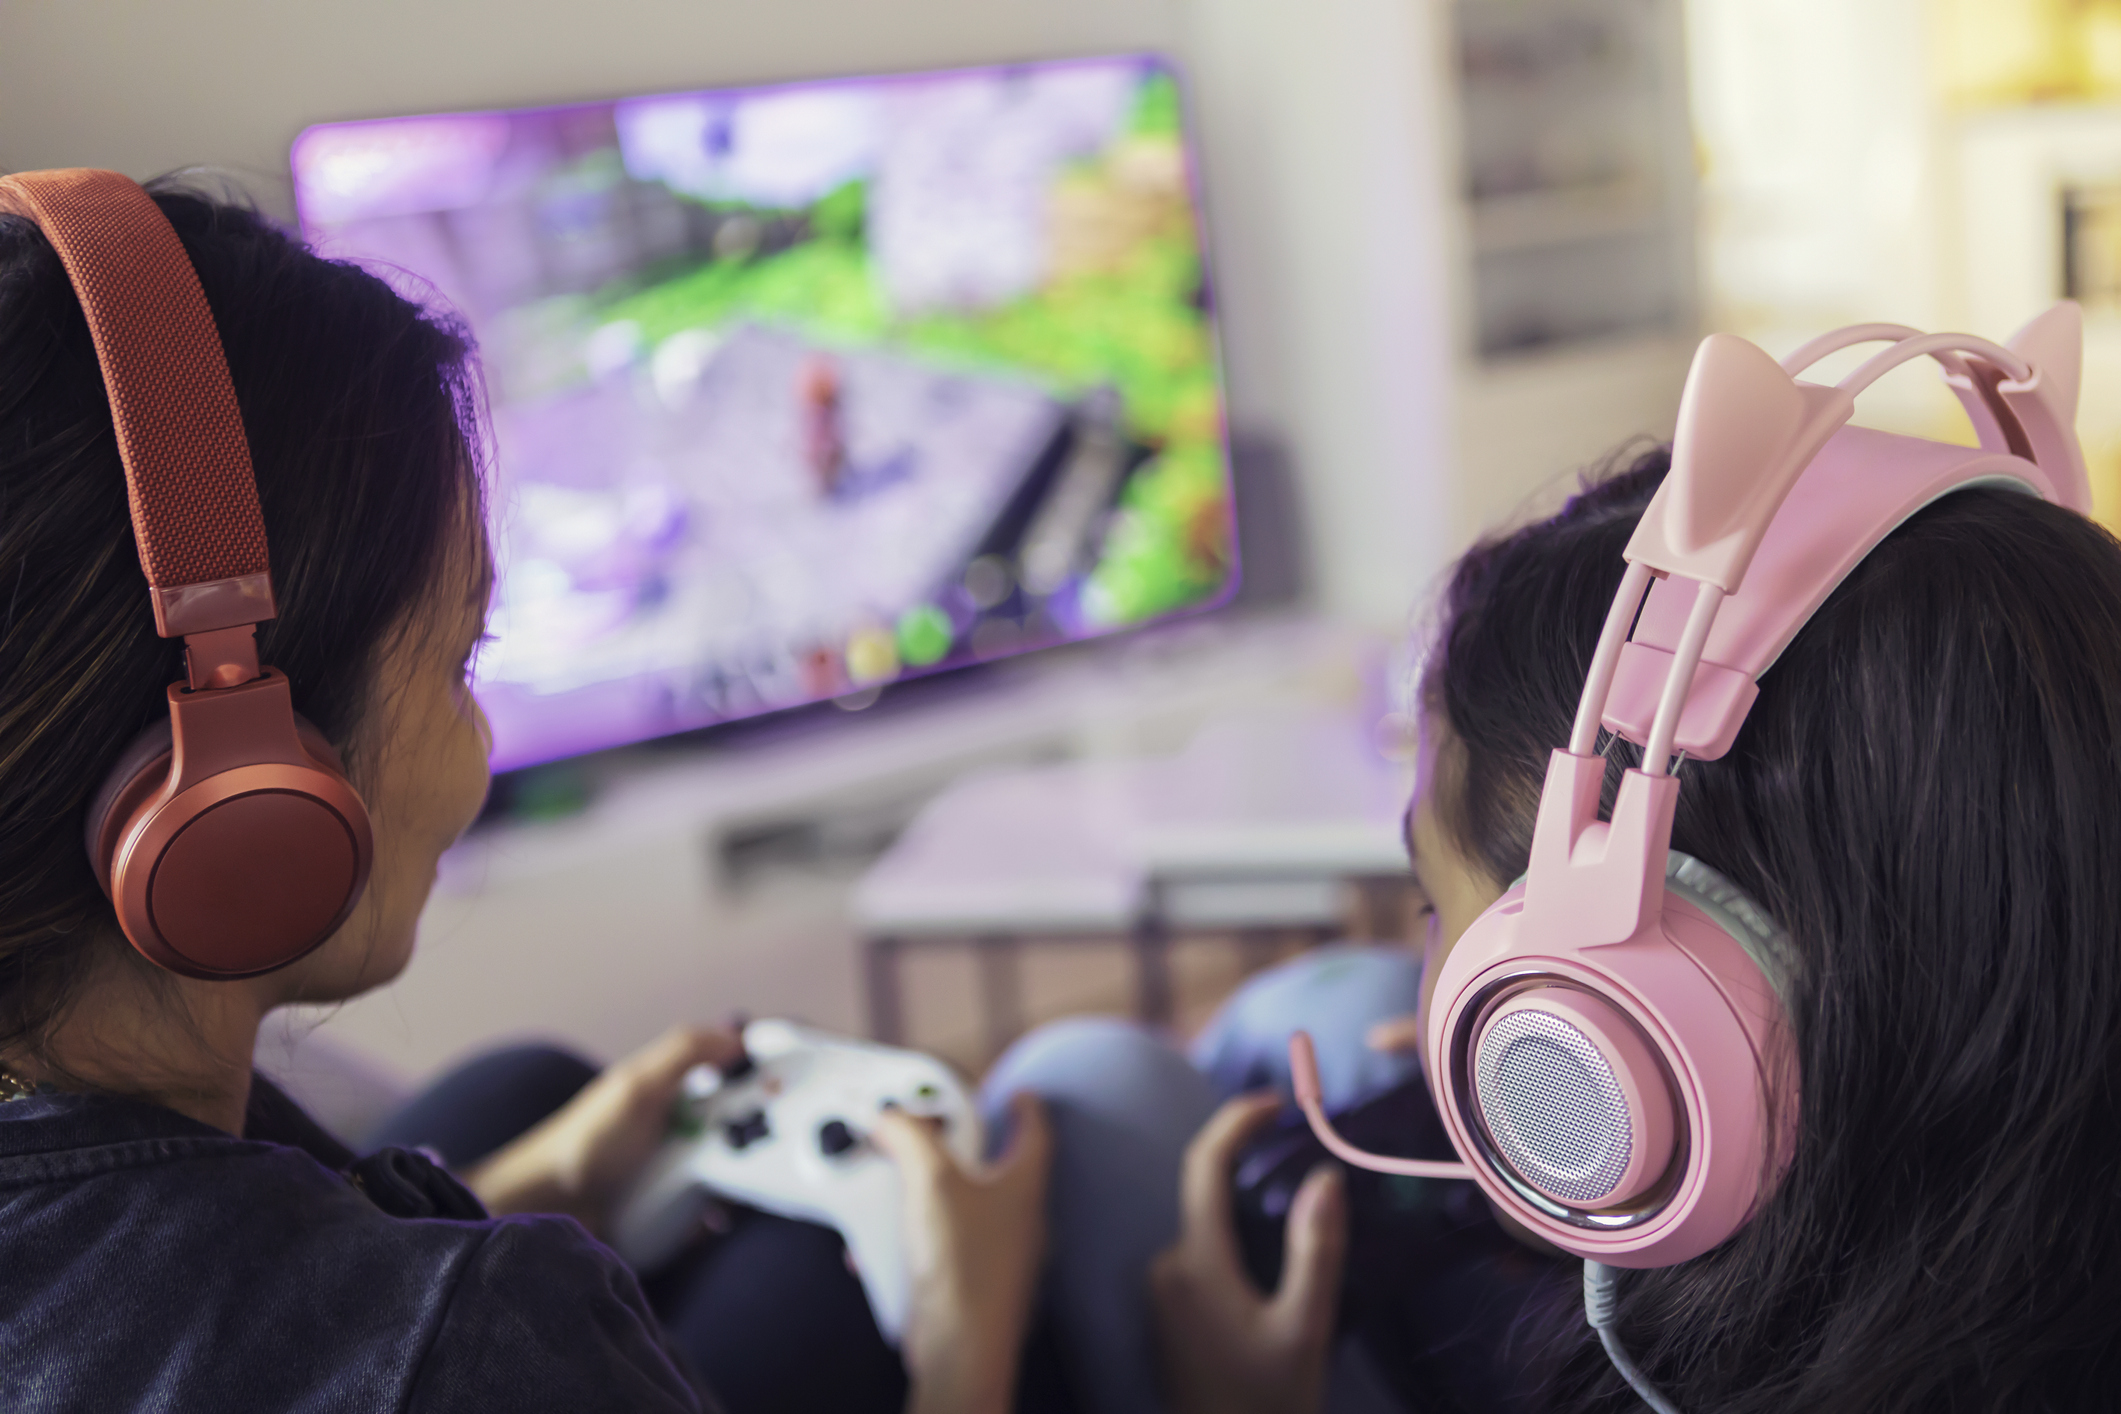 Close up of a mother and daughter playing video games together on a video game console using gamepads and headsets.